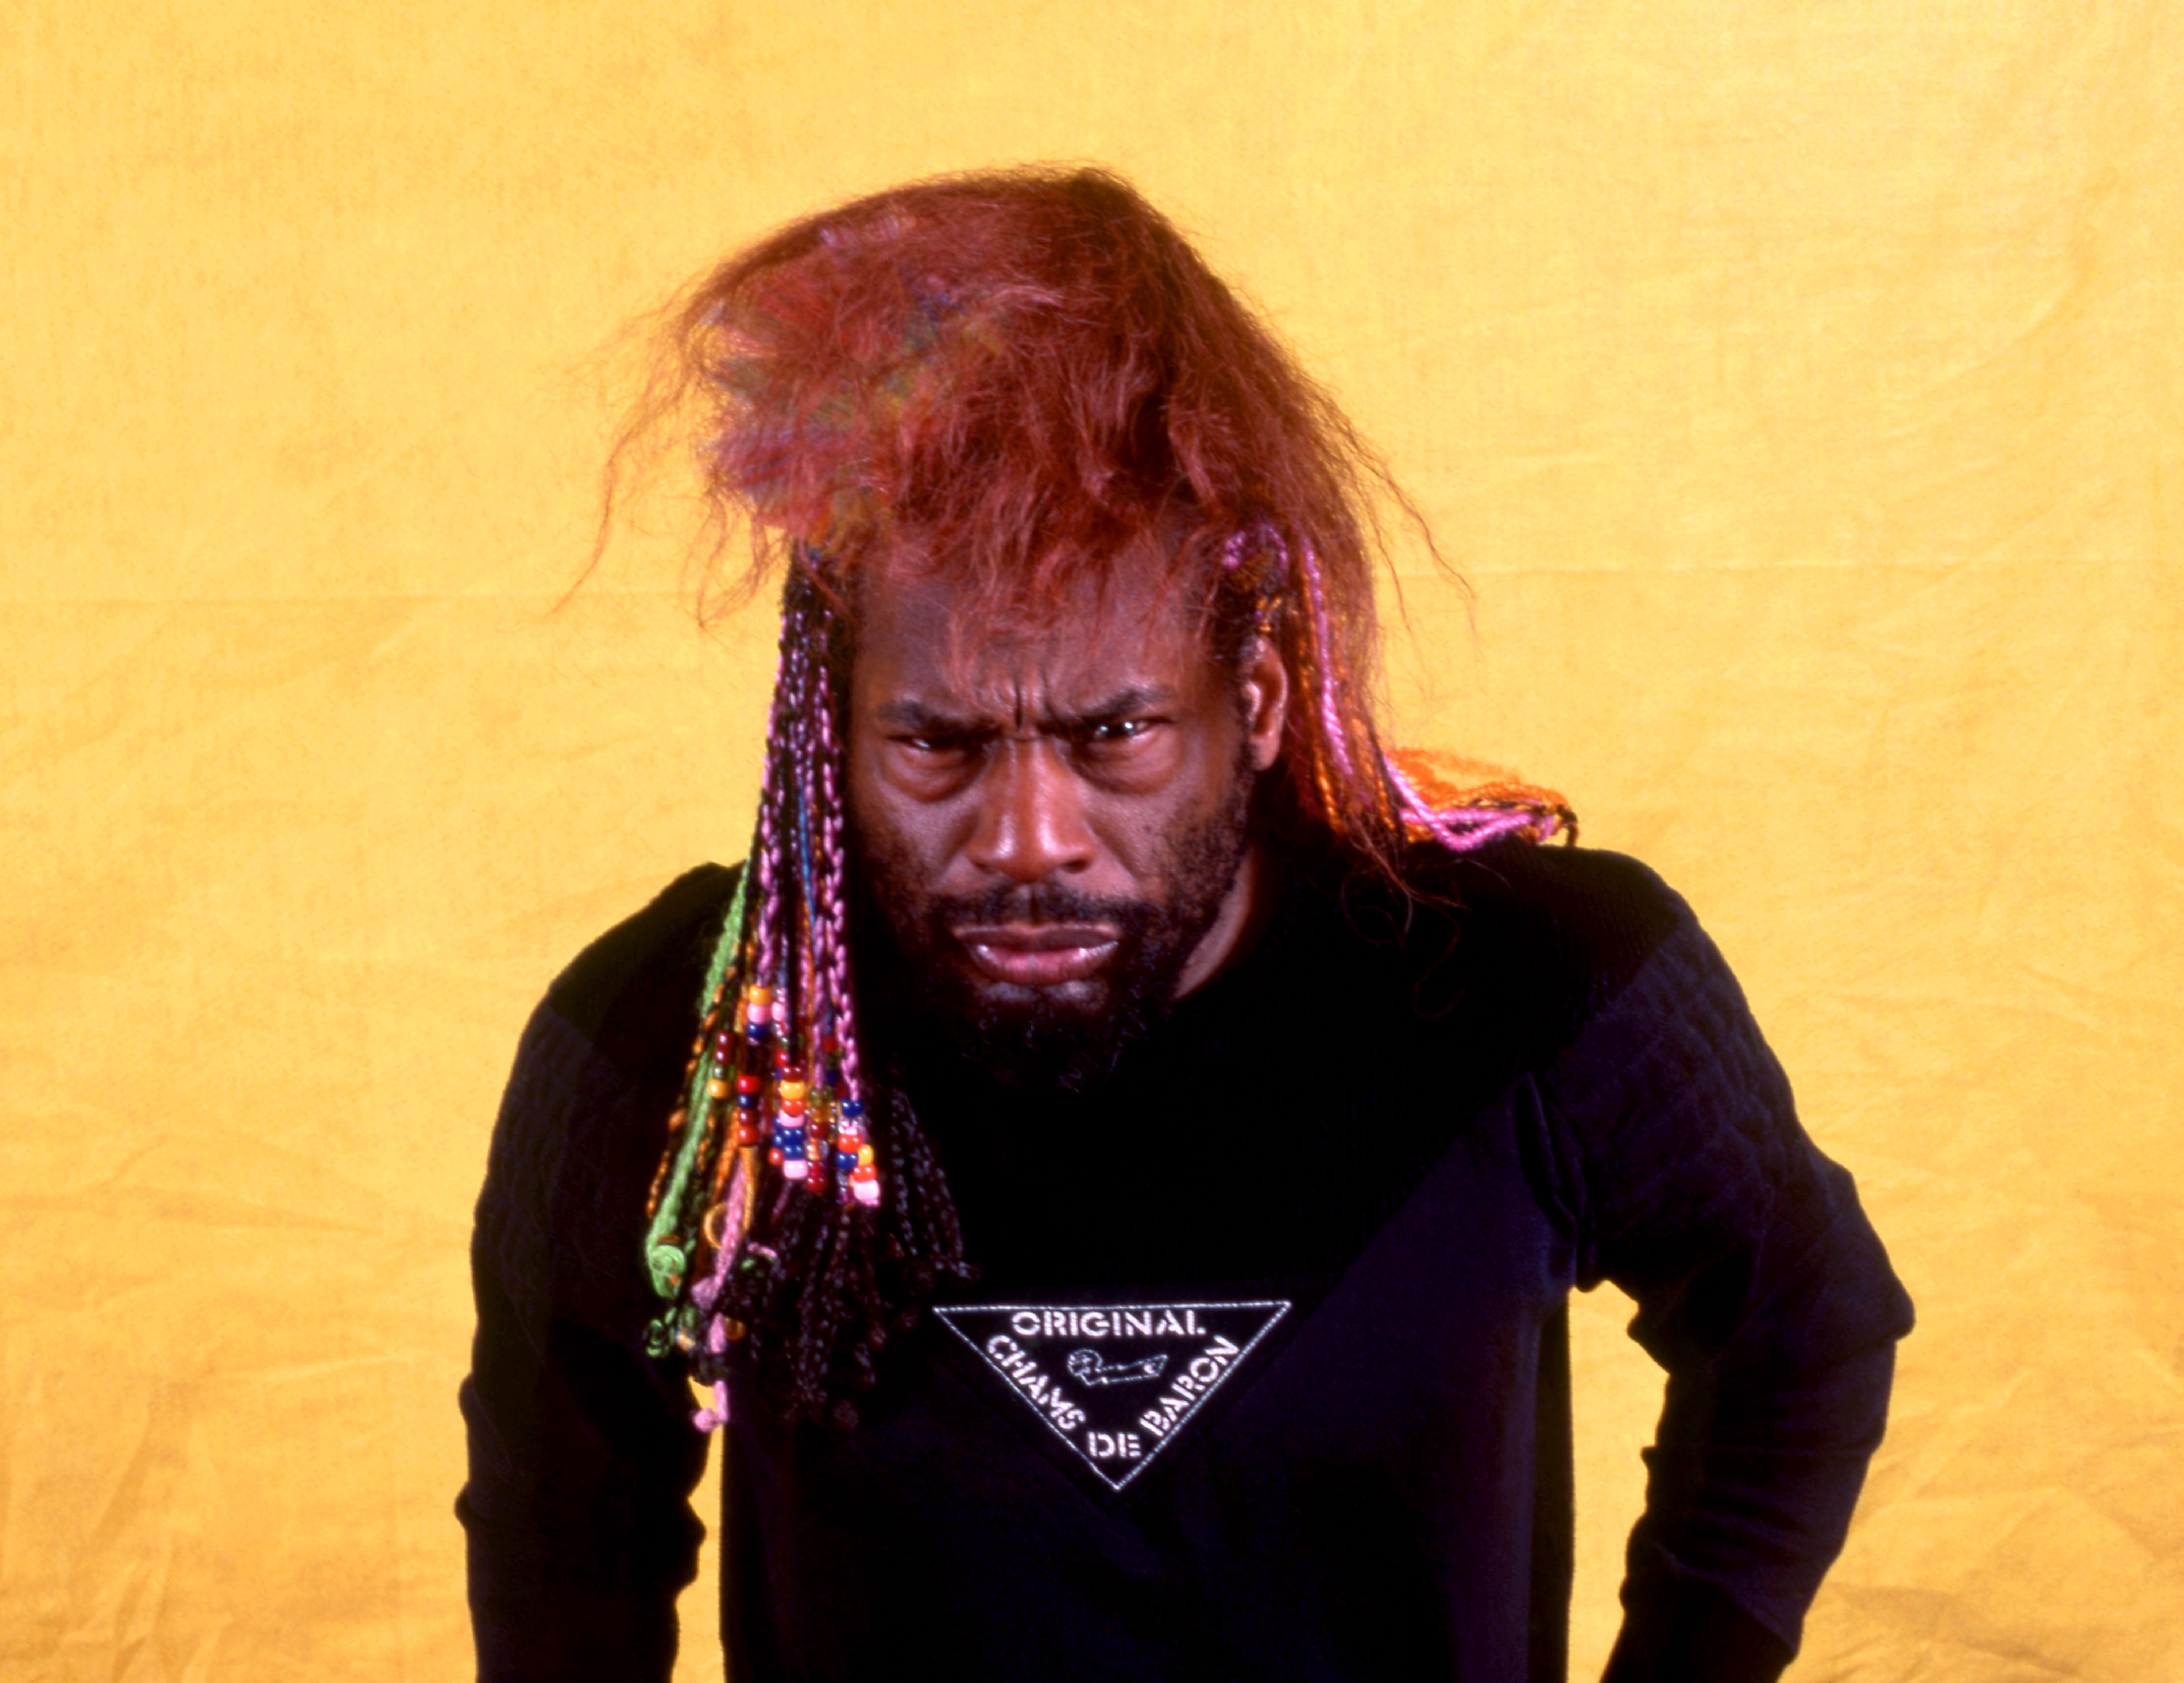 Parliament-Funkadelic: Our 1985 Interview With George Clinton